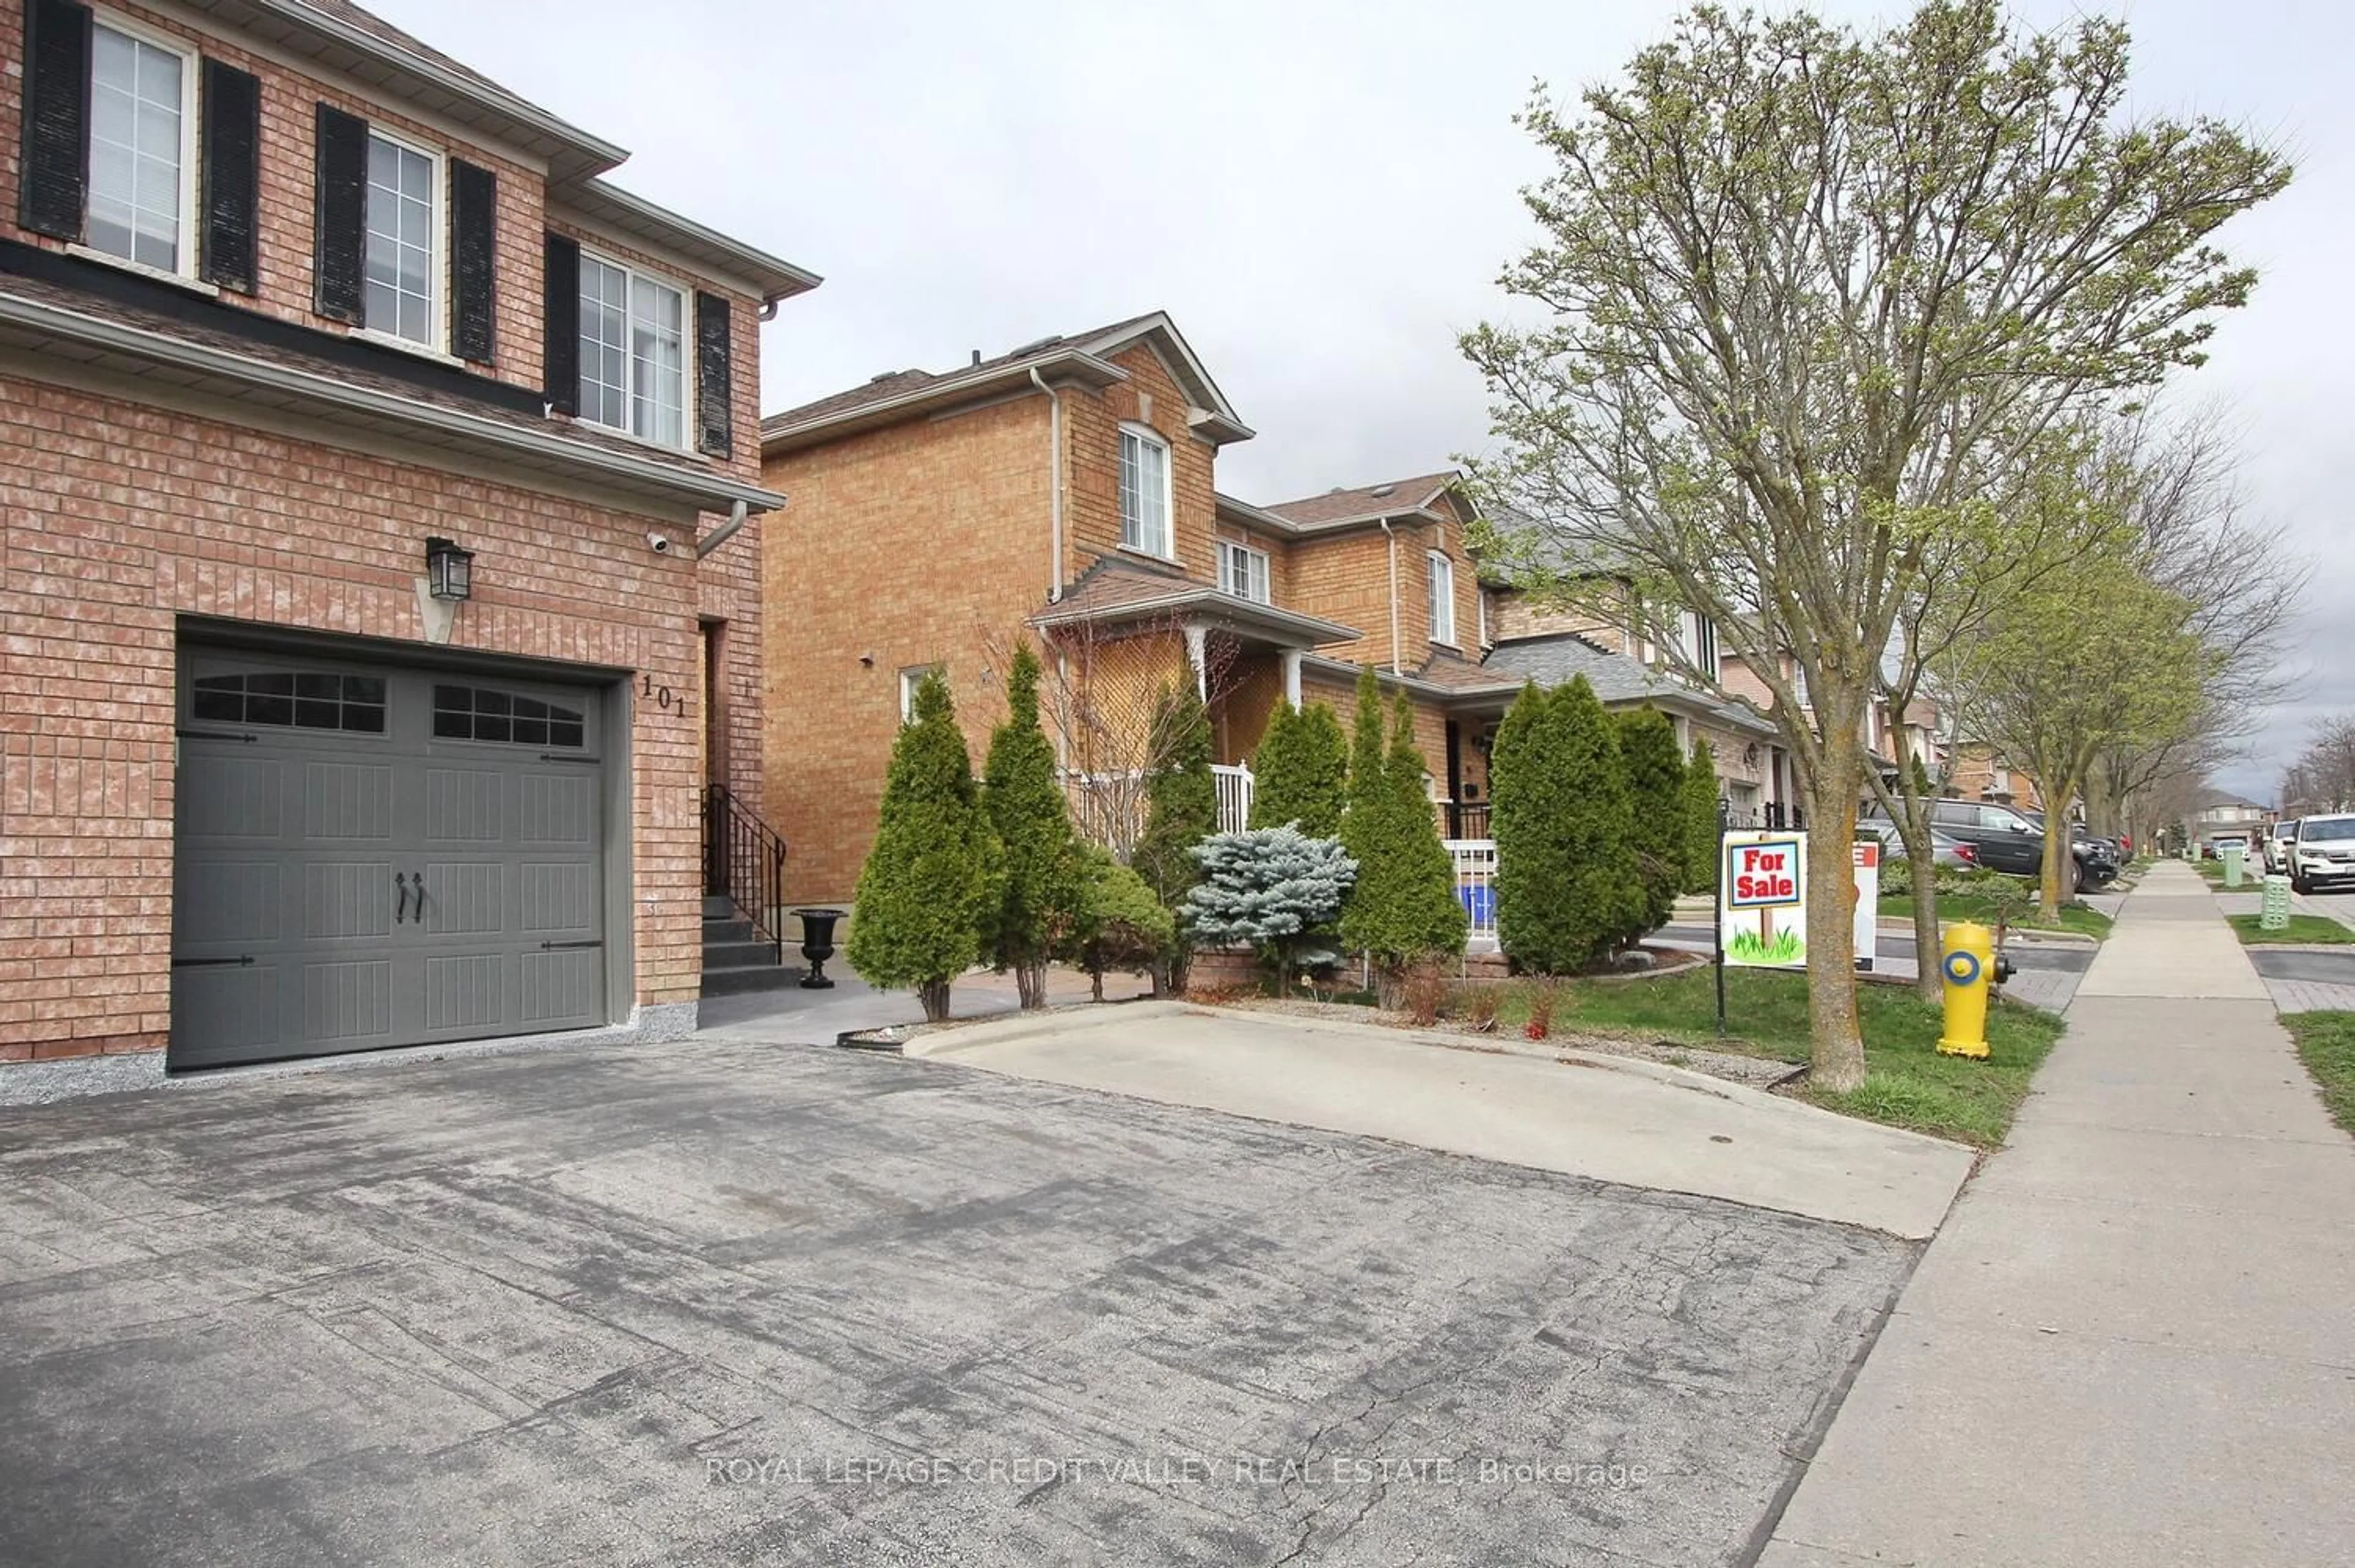 Home with brick exterior material for 101 David Todd Ave, Vaughan Ontario L4H 1R4